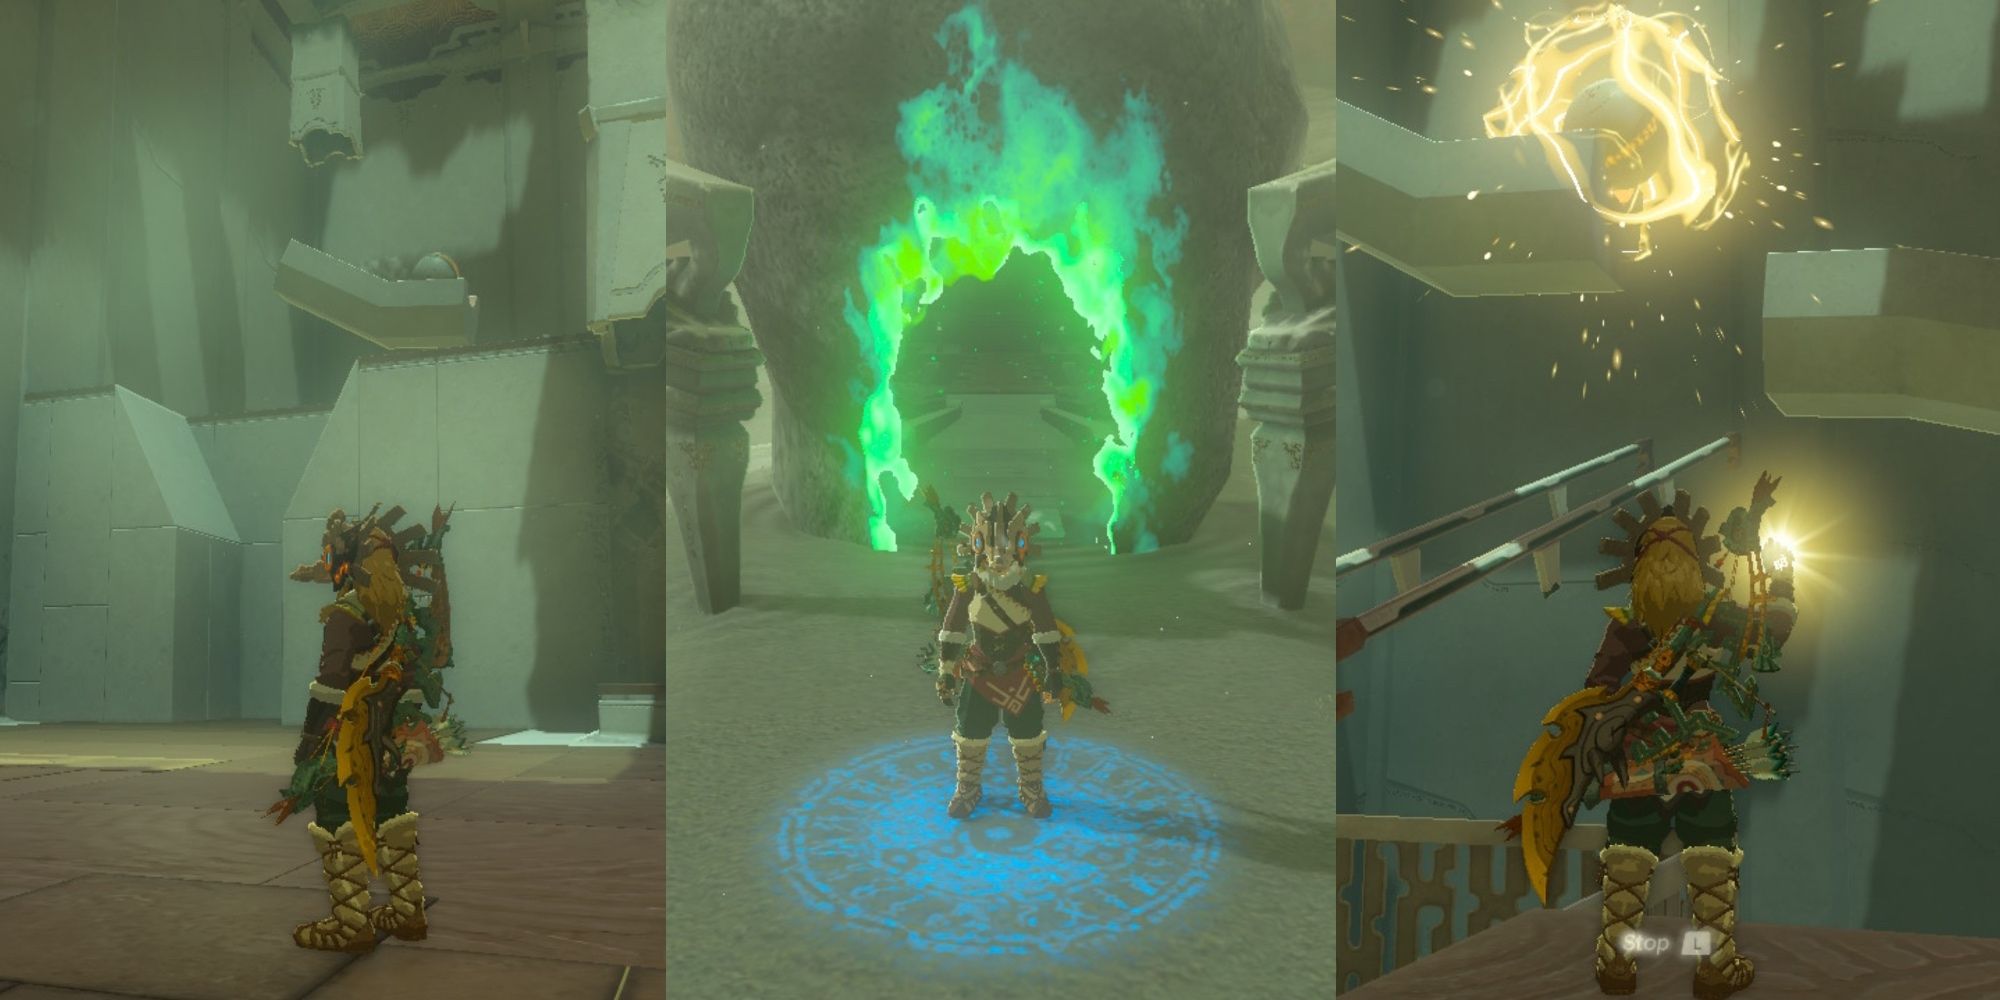 Link stands observing an indent. Link enters the Mayamats Shrine. Link uses Recall on a ball in THE LEGEND OF ZELDA: Tears of the Kingdom.